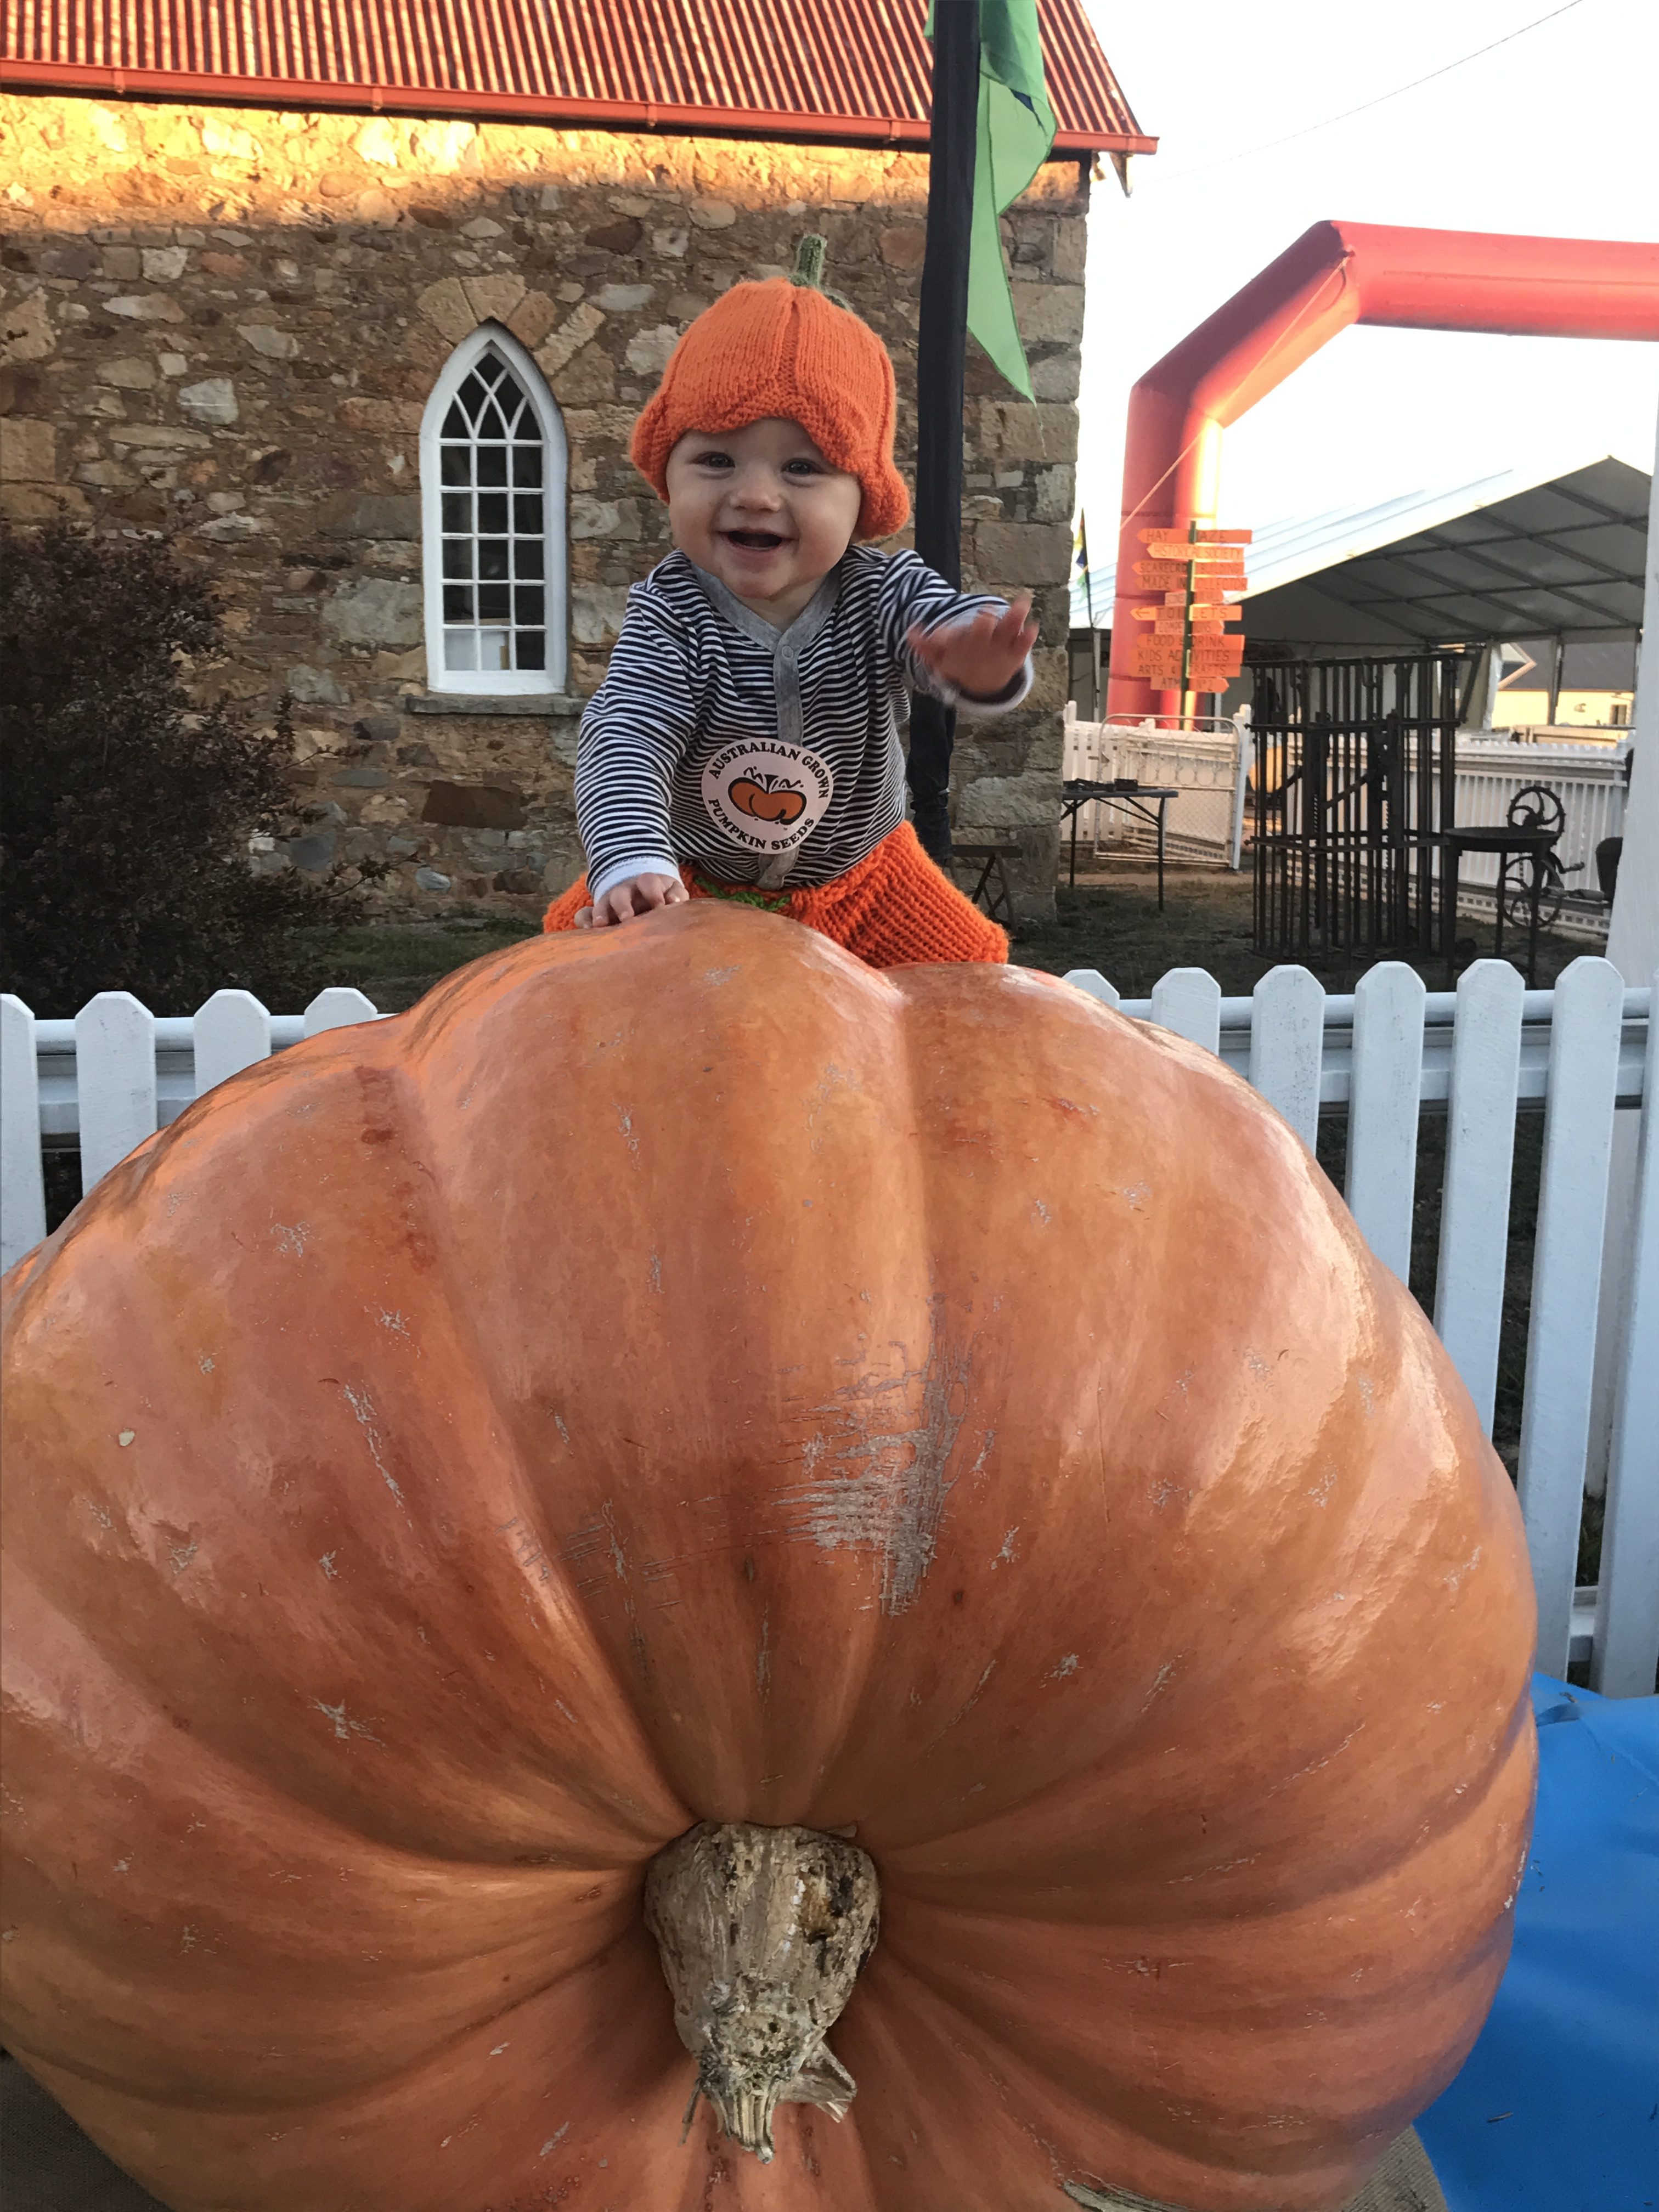 Pumpkins, sunshine and family fun at Collector this Sunday